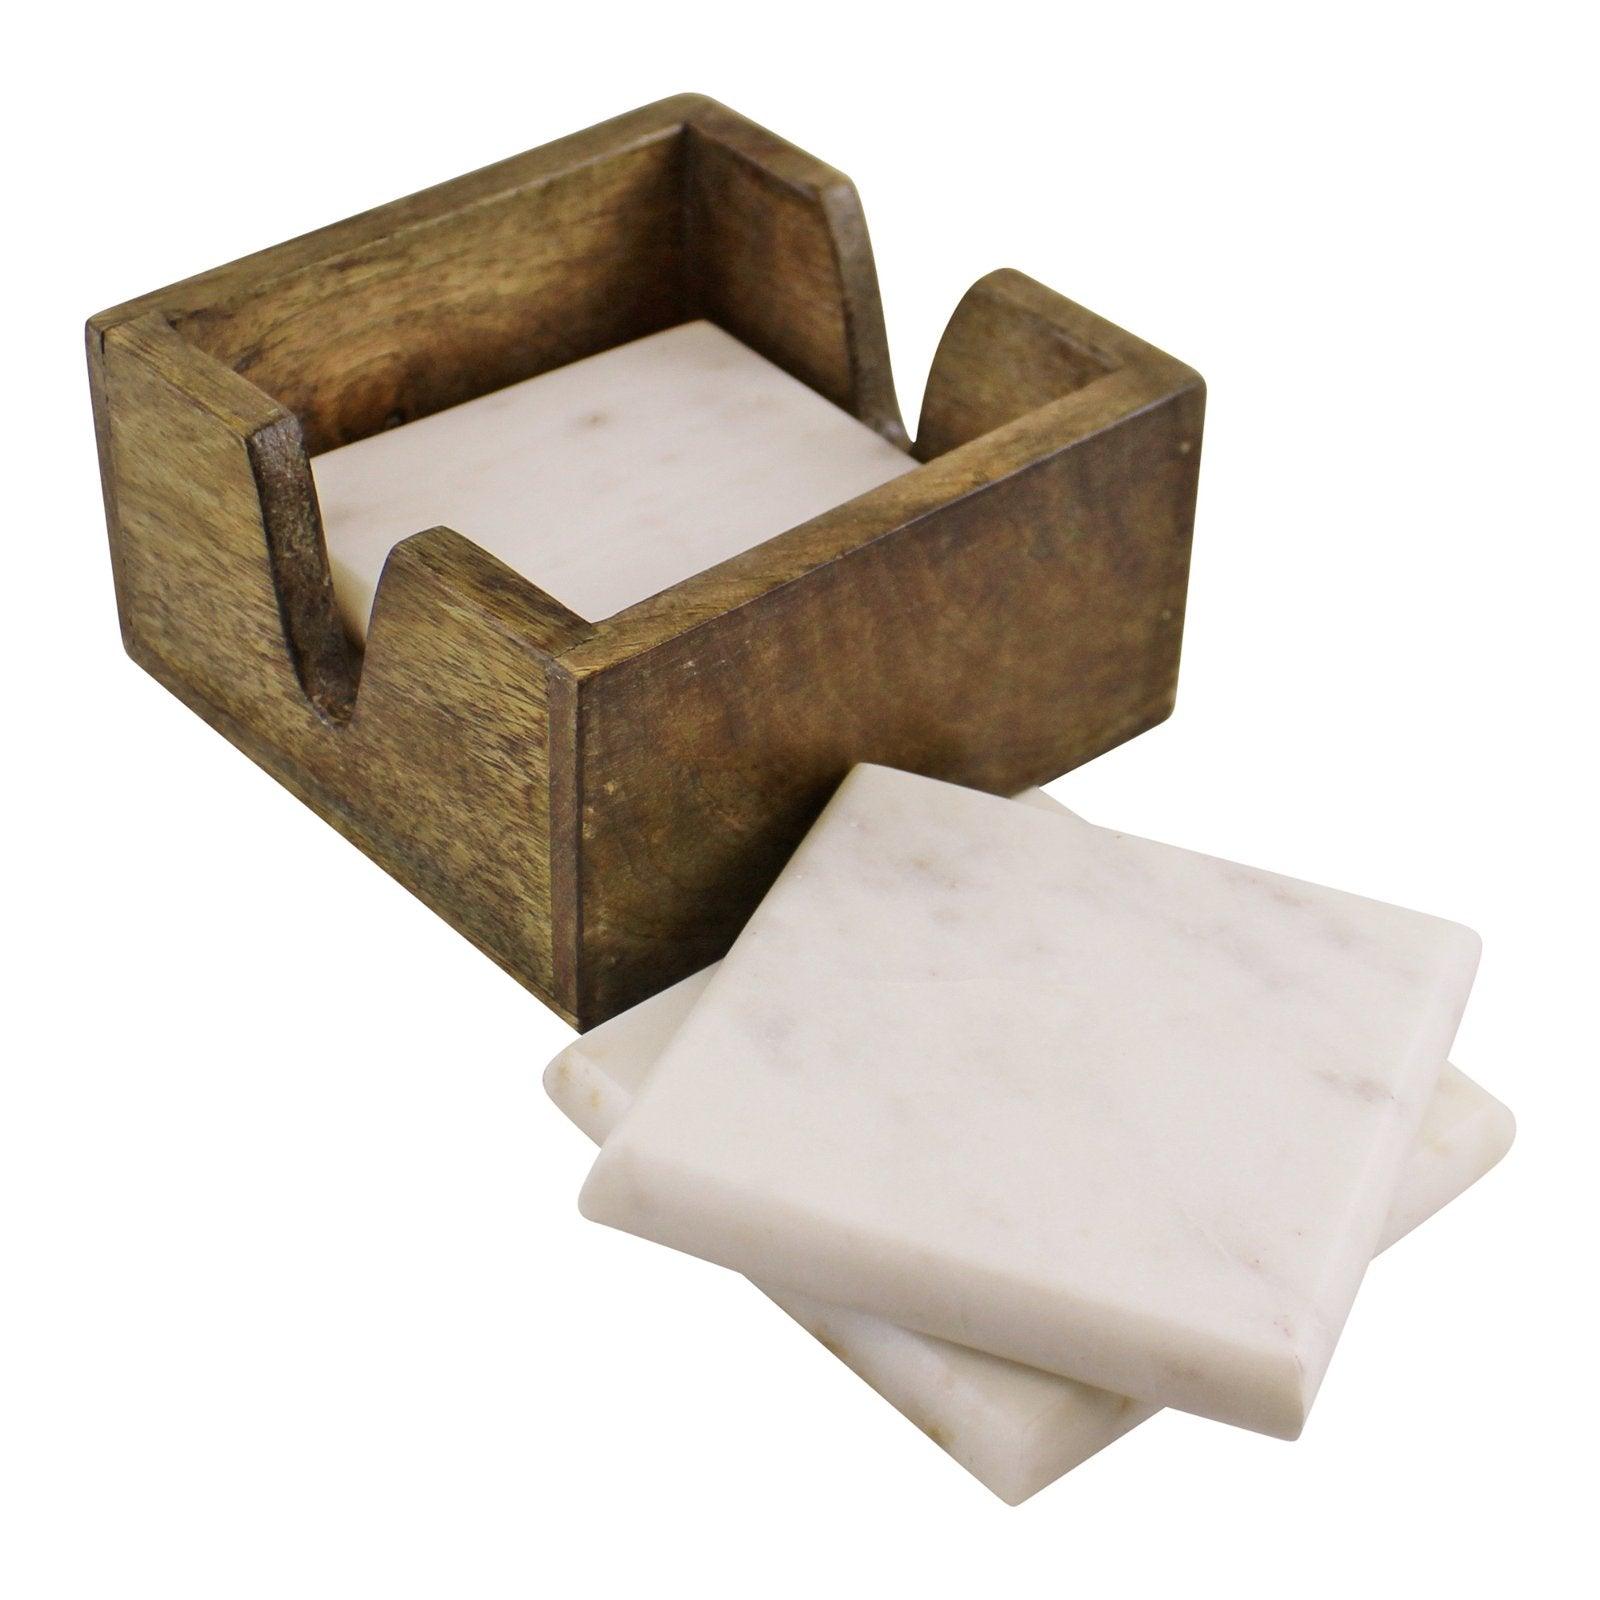 Set of 4 High Quality Marble Coasters In A Mango Wood Holder-Coasters & Placemats